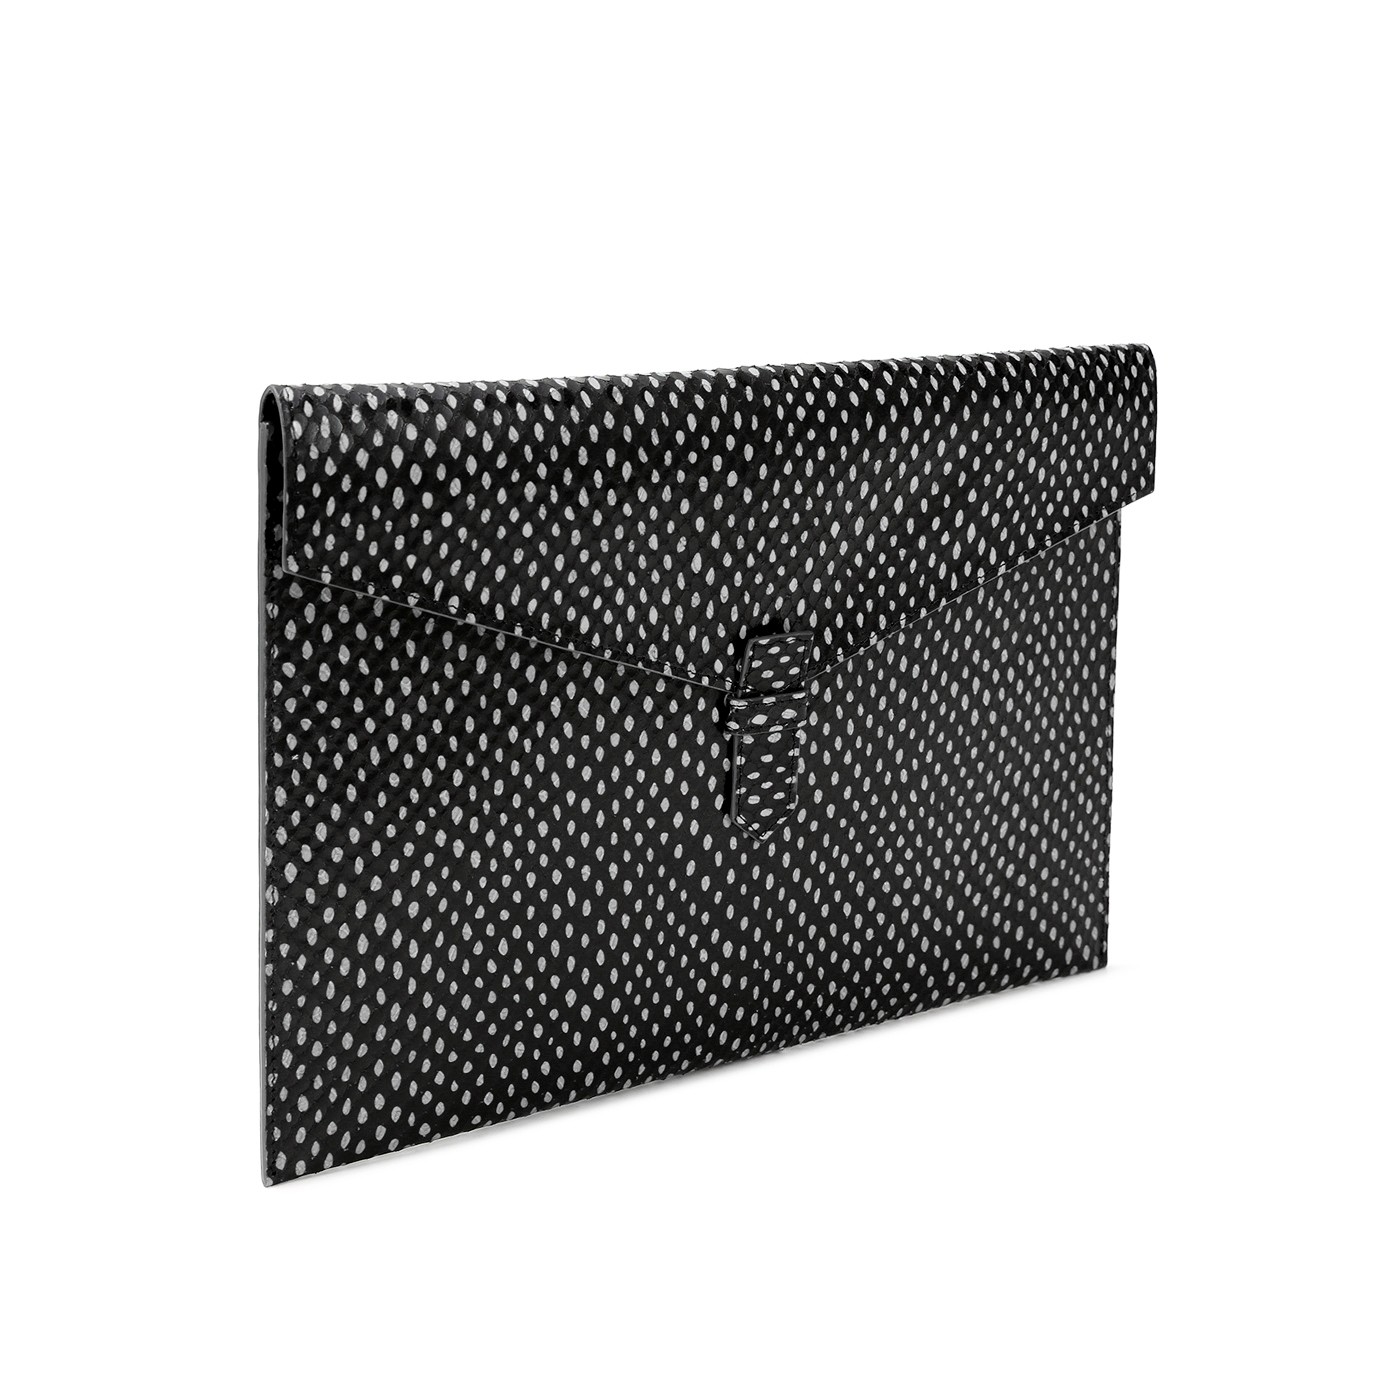 RABEANCO - Large Envelope Clutch - Click Image to Close